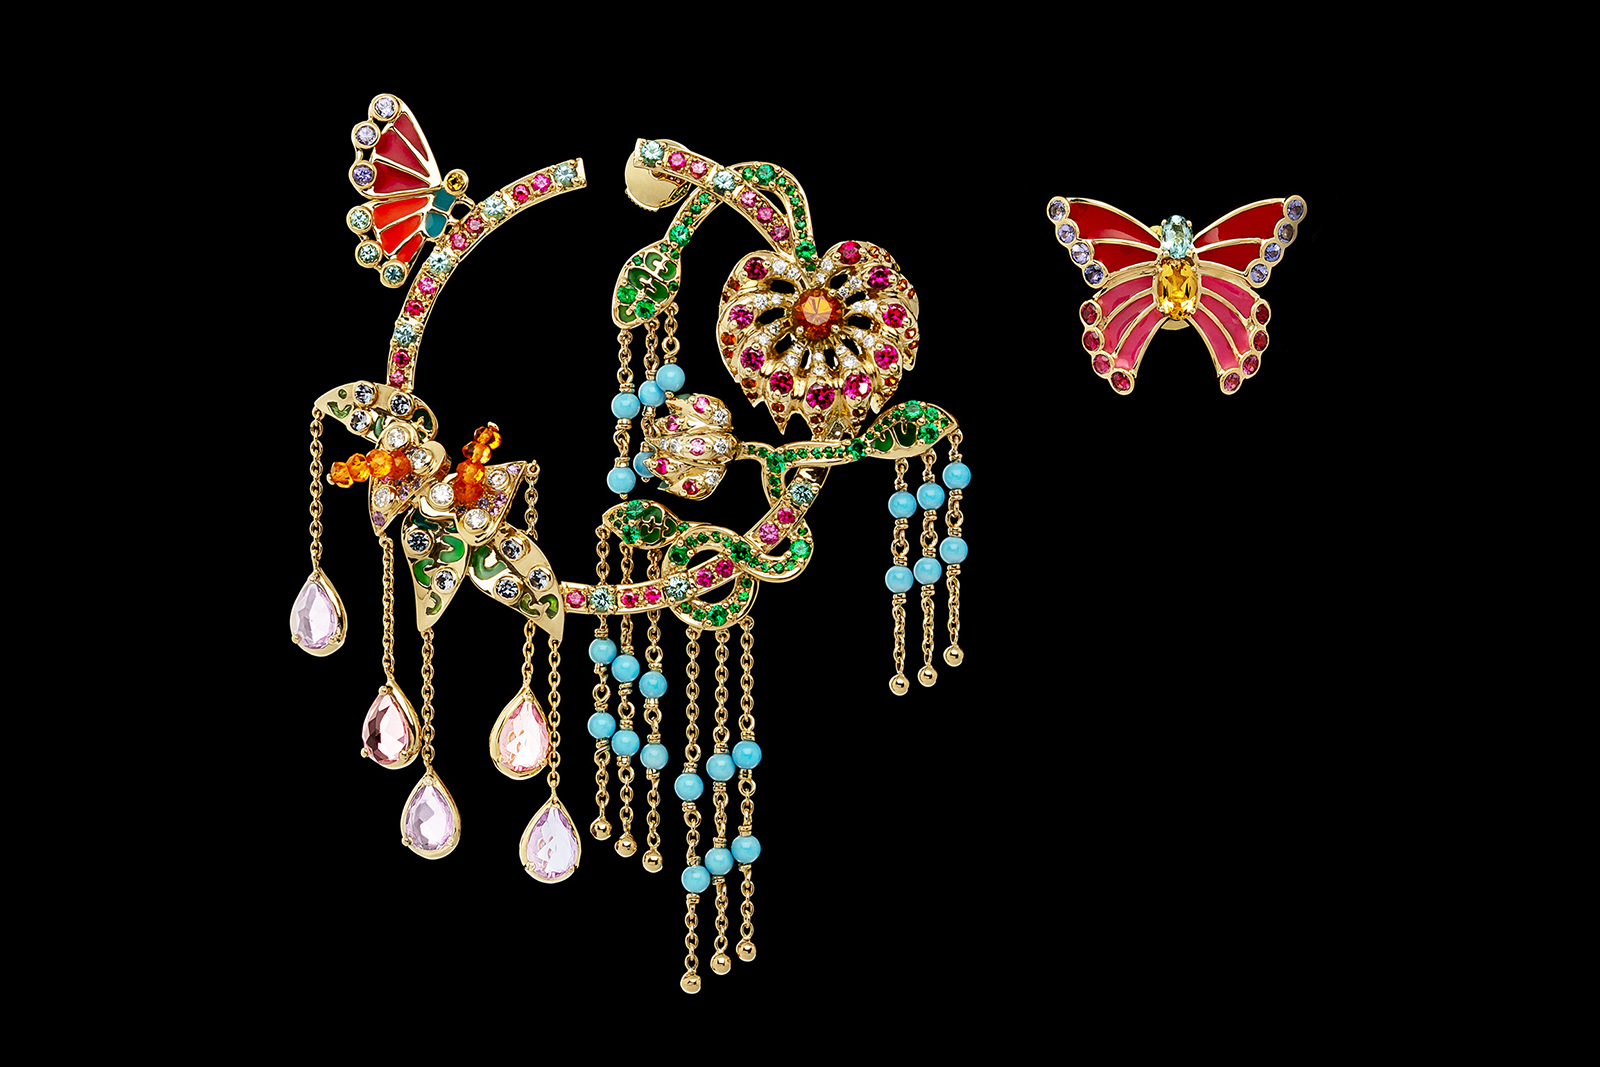 Aude Mathon x Émeline Piot ‘Unique’ collection 'Eden' earrings with tourmaline, emeralds, spinels, garnets, sapphires, diamonds, turquoise and enamel in yellow gold